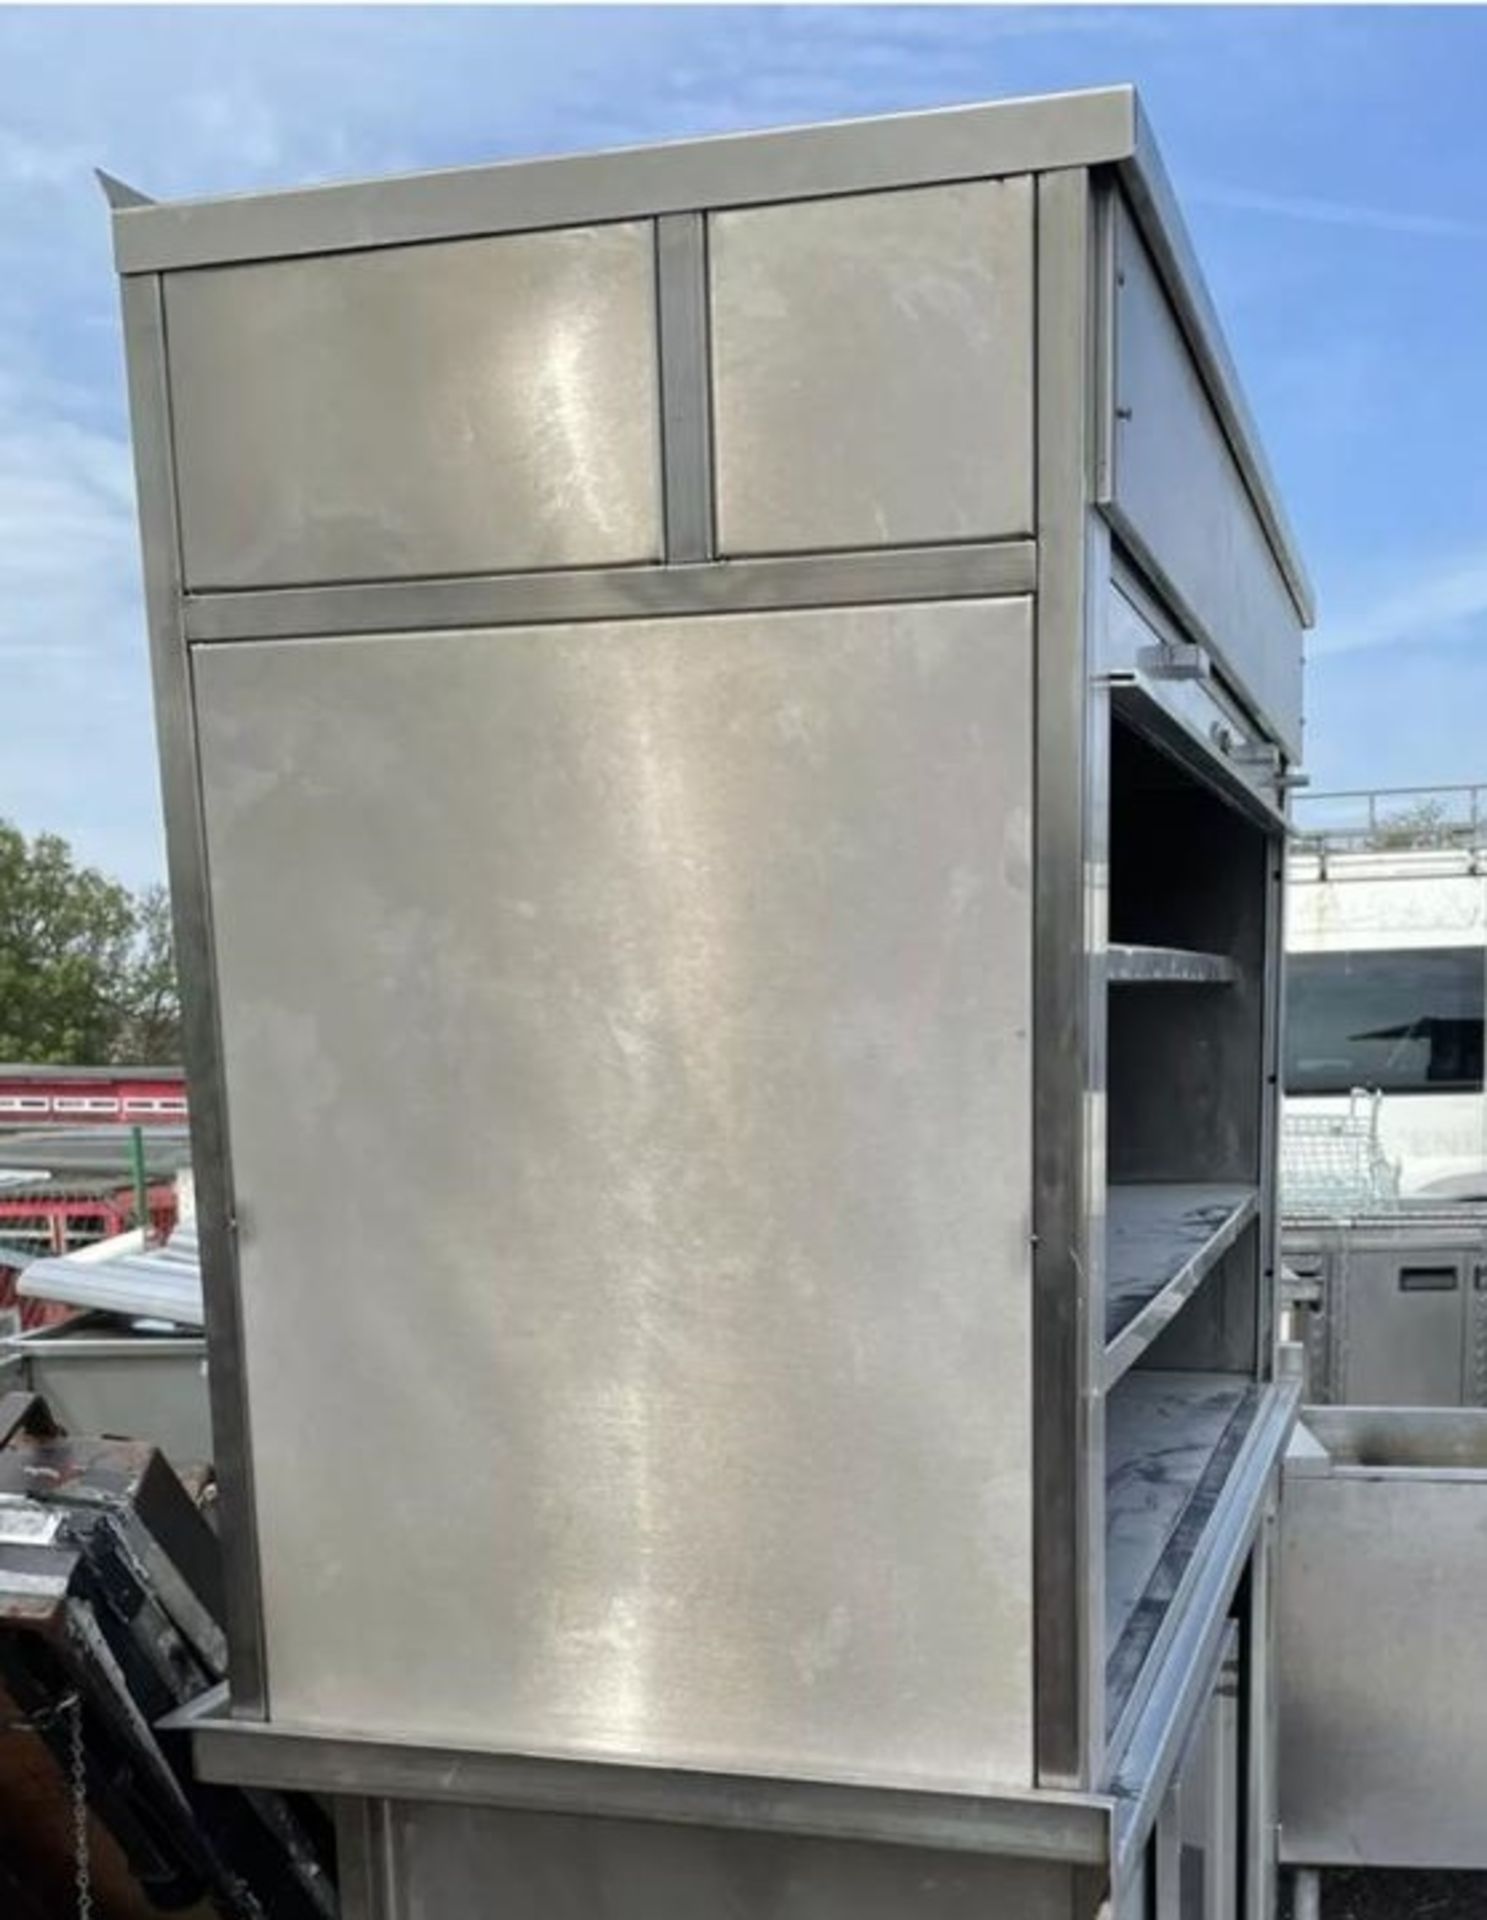 1 x Stainless Steel Storage Cabinet With Manual Roller Shutter Door - CL667 - Location: Brighton, - Image 2 of 2